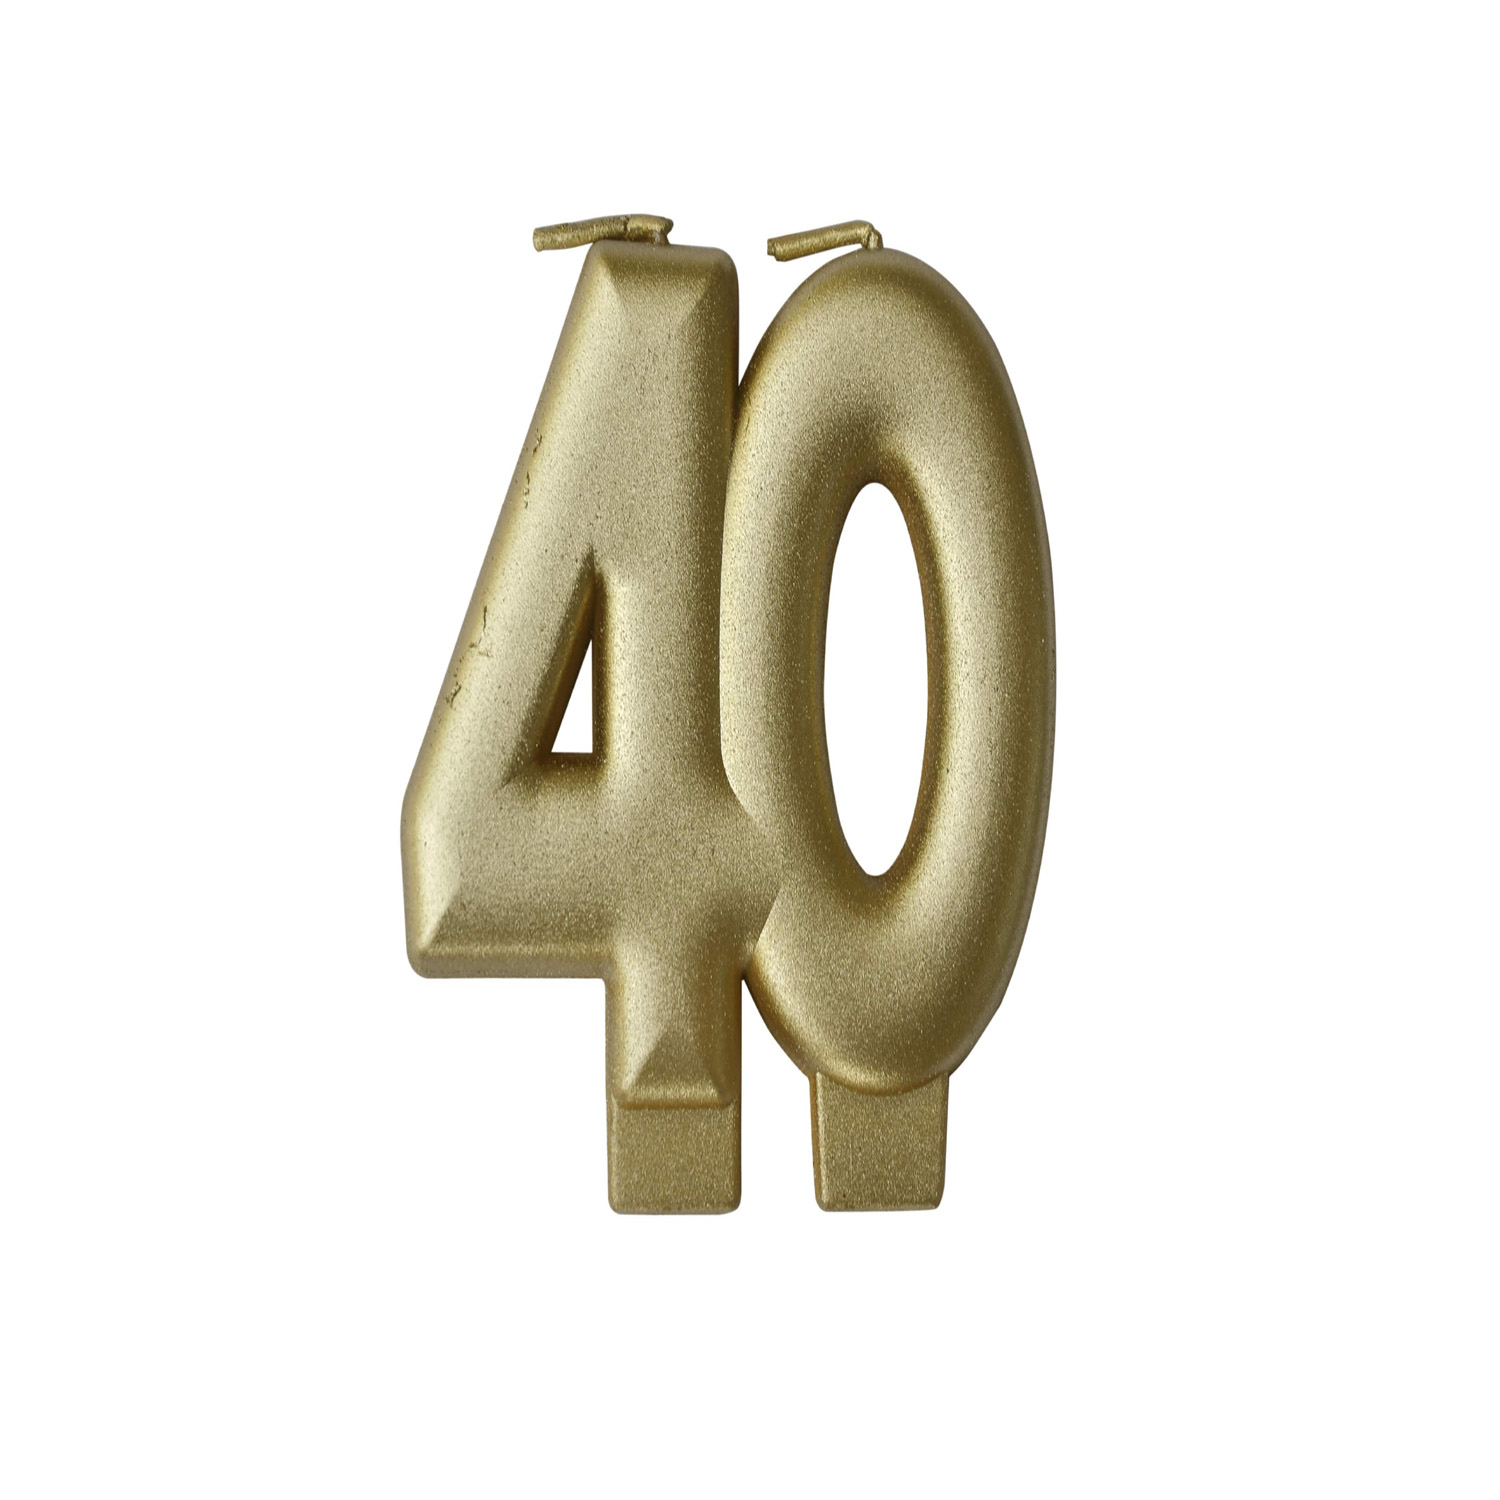 40th Birthday Golden Candle - 3"